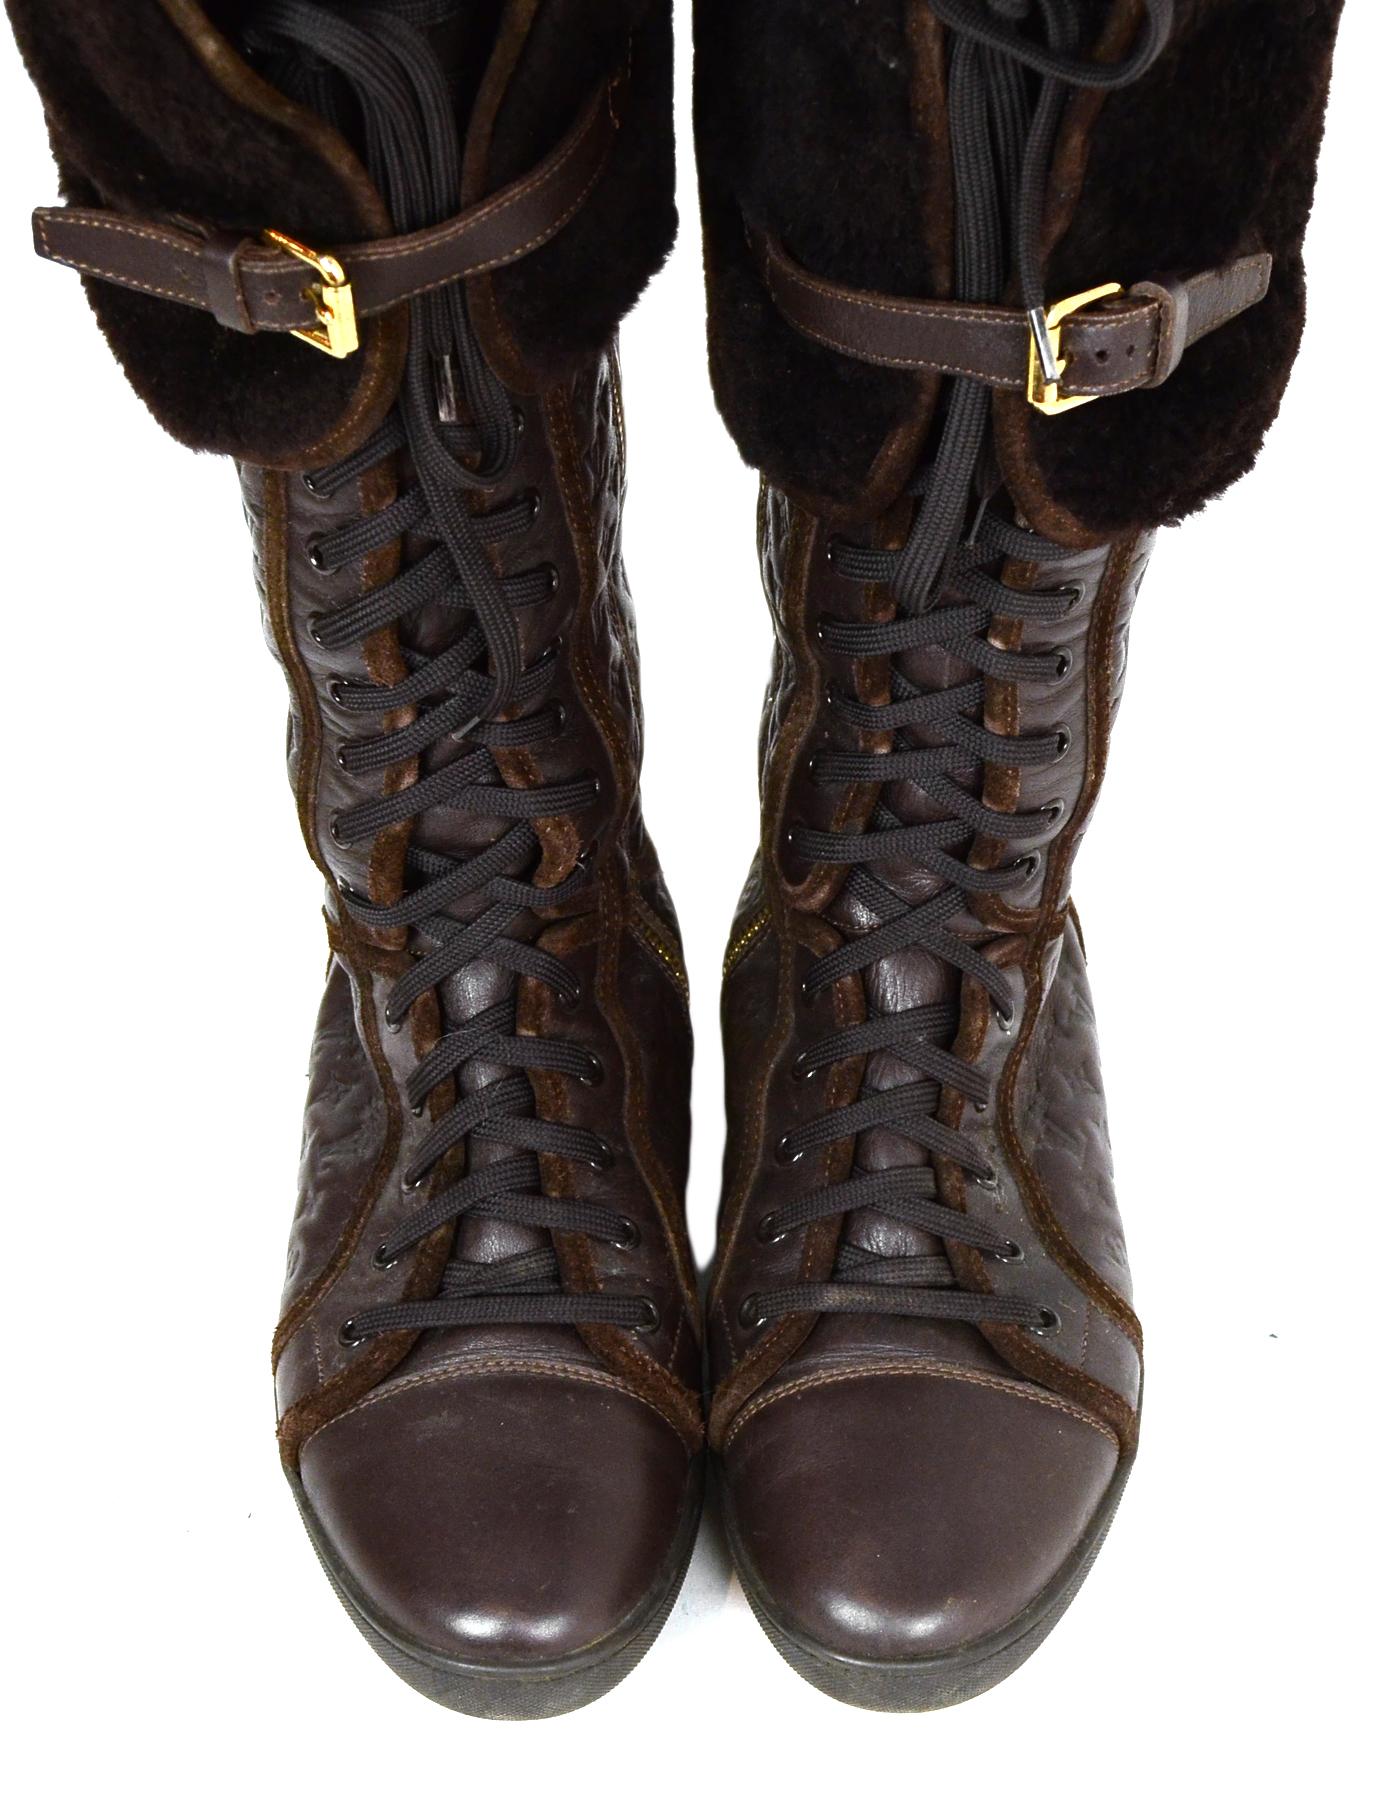 Black Louis Vuitton Brown Empreinte Leather Lace Up Boots with Shearling Lining sz 37